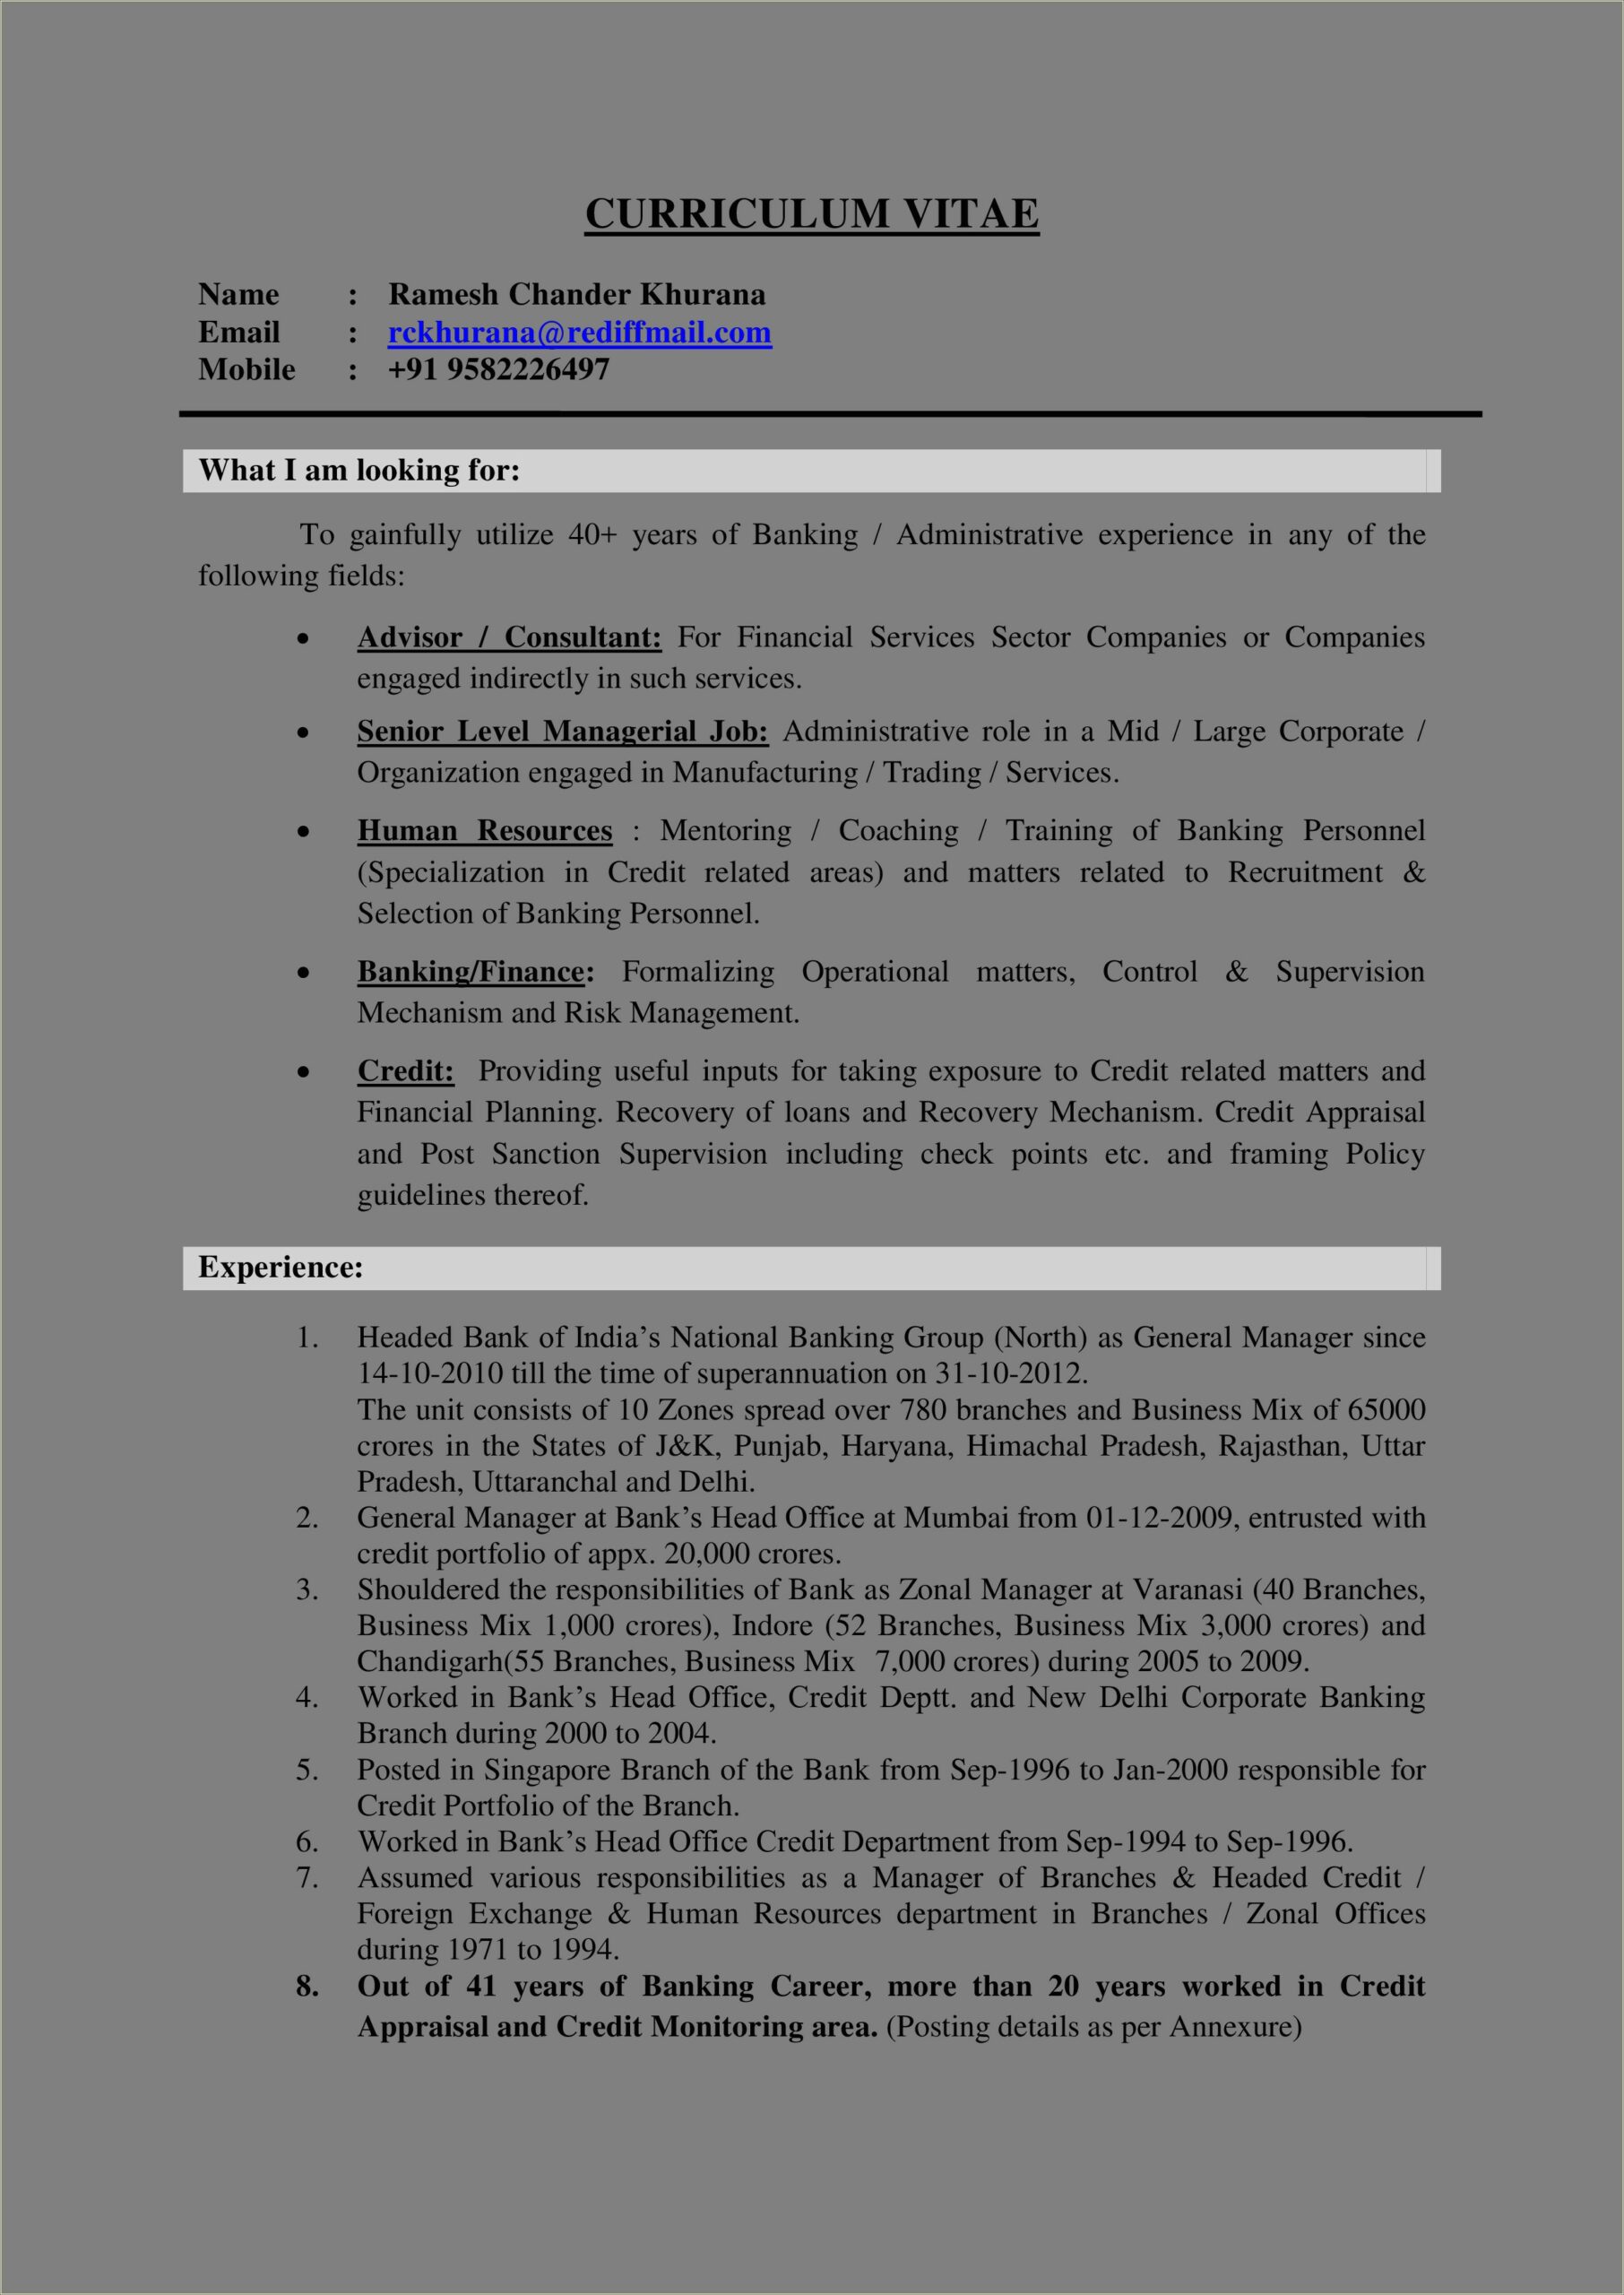 Examples Of Corporate Resumes For Banking Center Managers